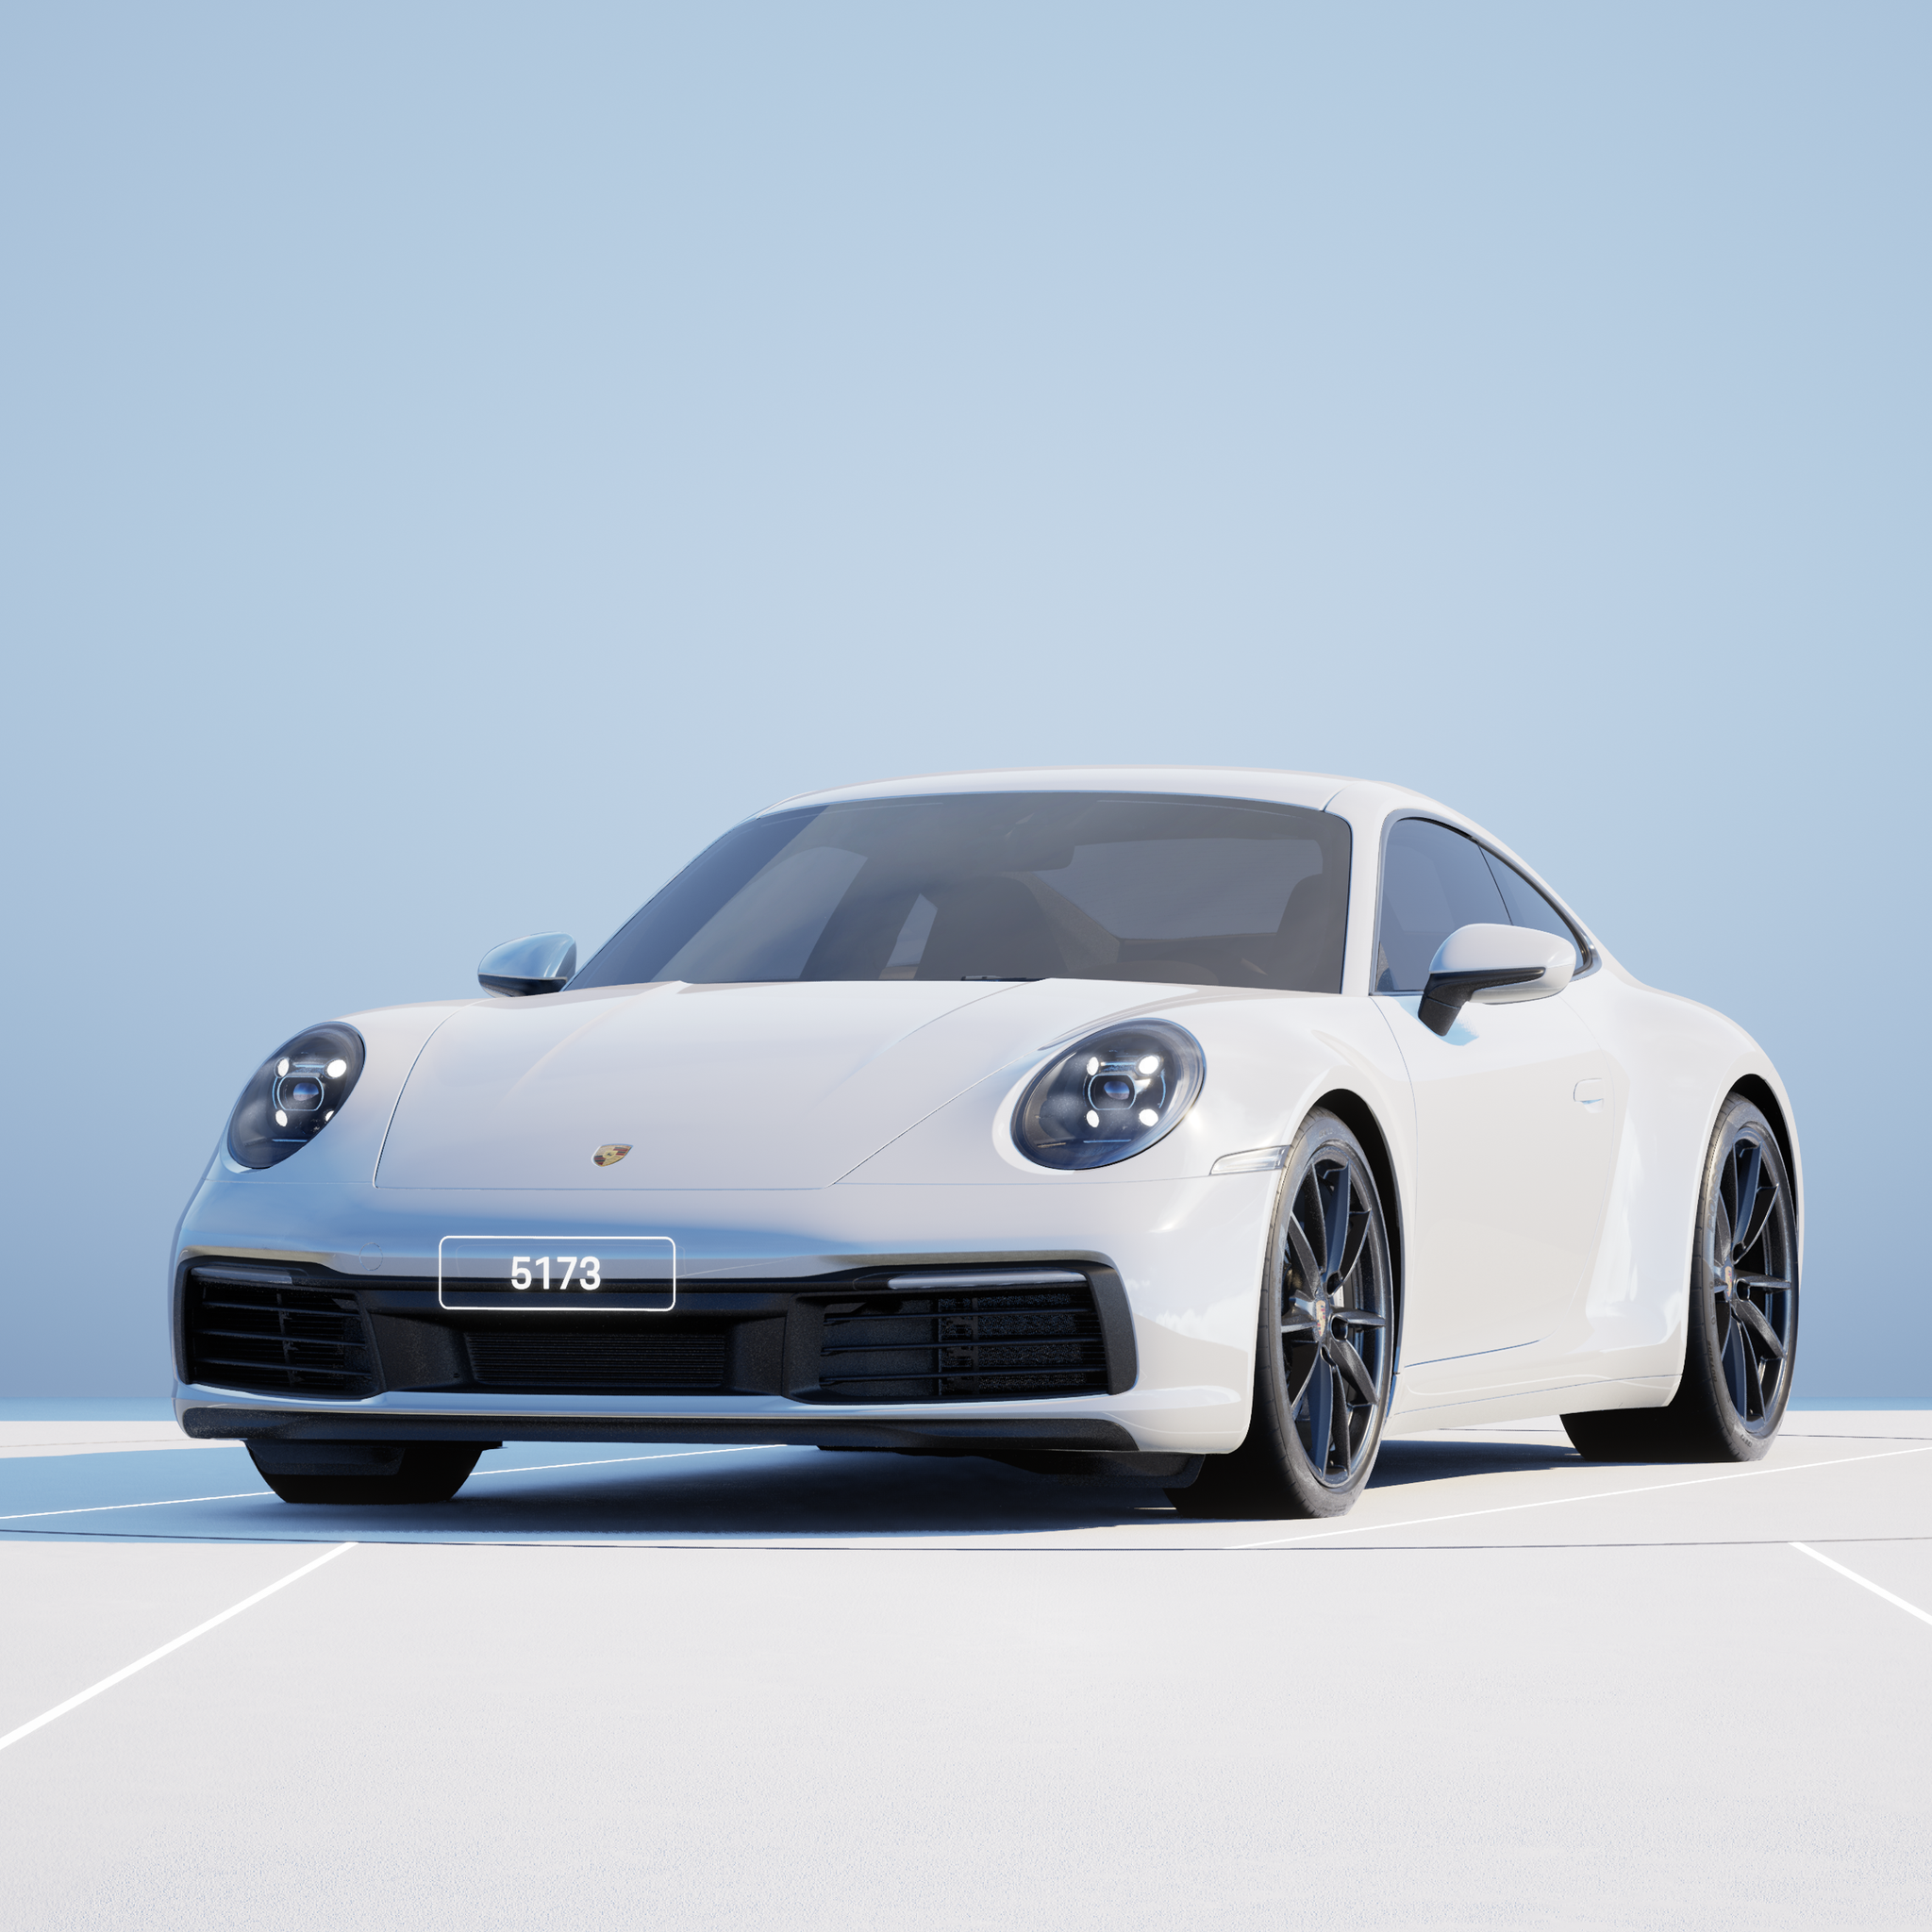 The PORSCHΞ 911 5173 image in phase